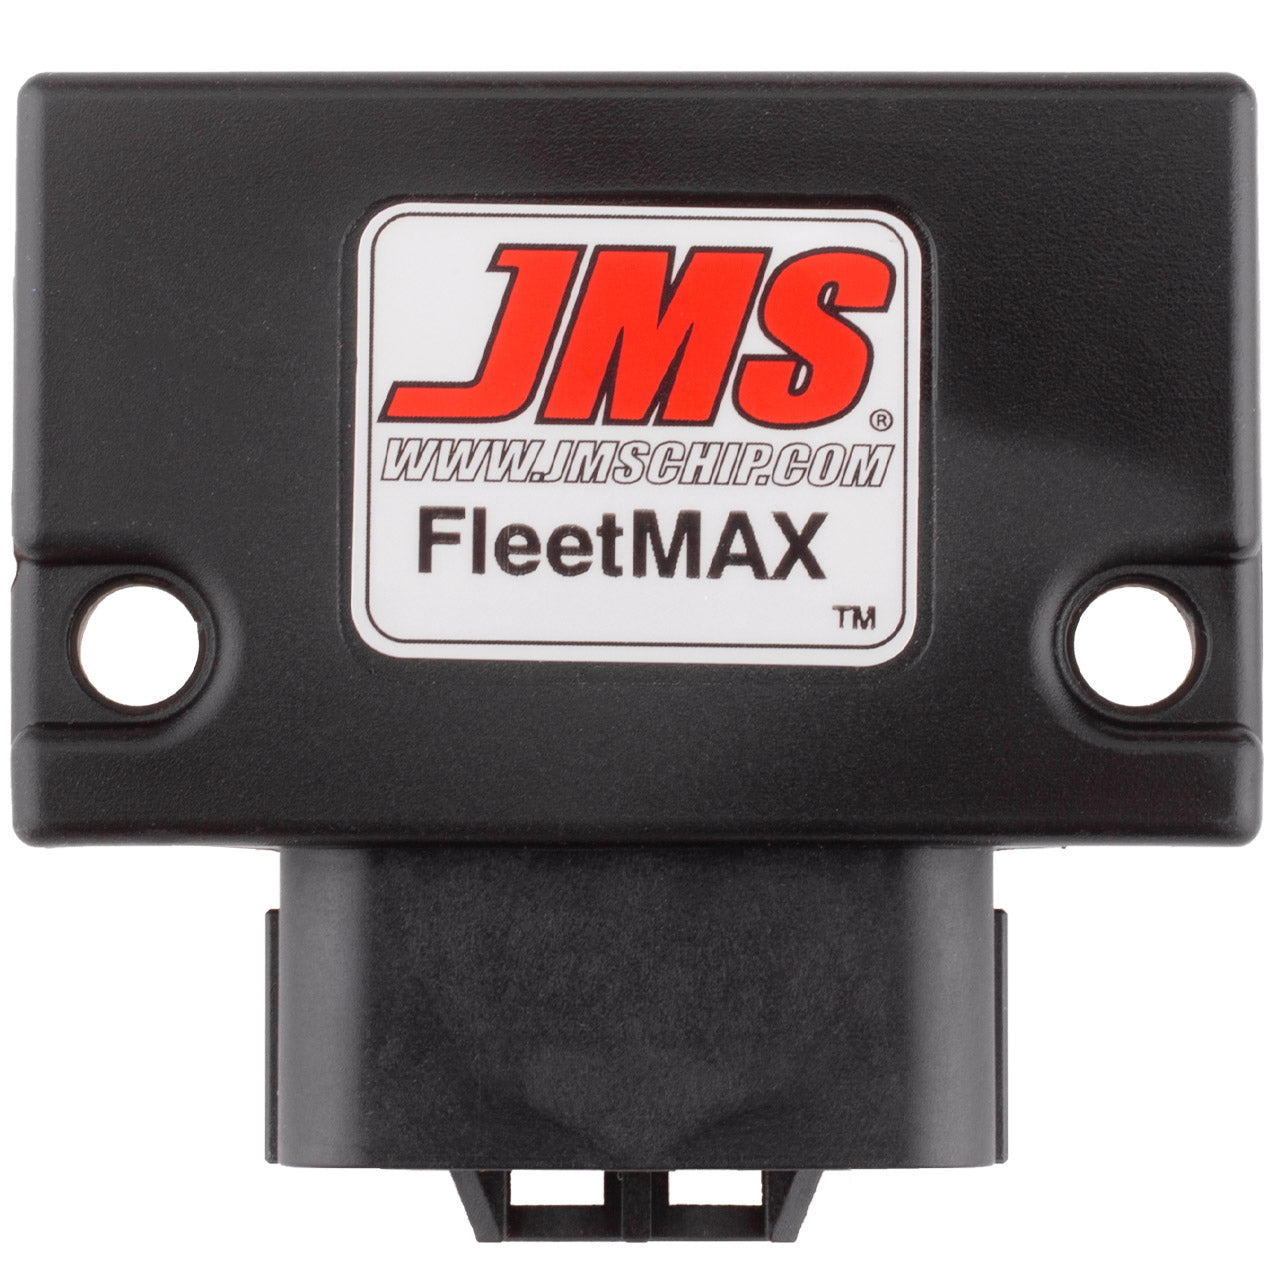 JMS FleetMAX Speed Control Device. Plug and Play for 2014 - 2021 Toyota Vehicles with electronic throttle control FX71718TYV3